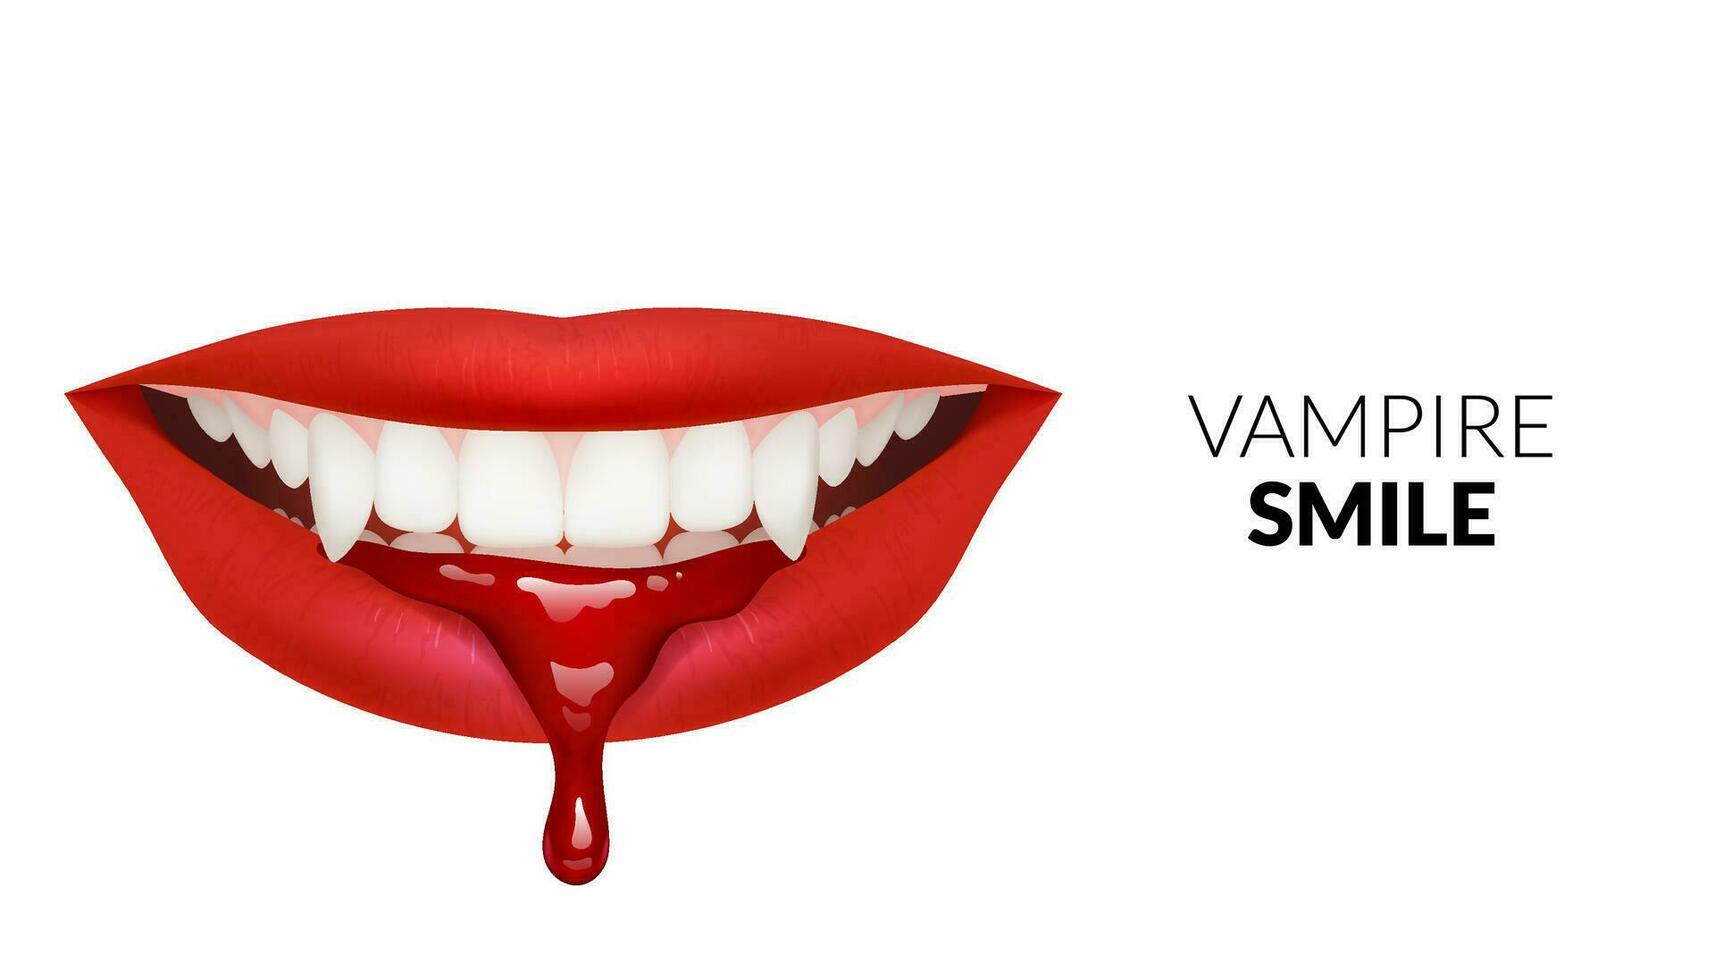 3D illustration of a vampire smile, featuring sharp fangs and blood red lips with splatters of blood drops. Ideal for horror or spooky themes.  Realistic teeth and lips. vector